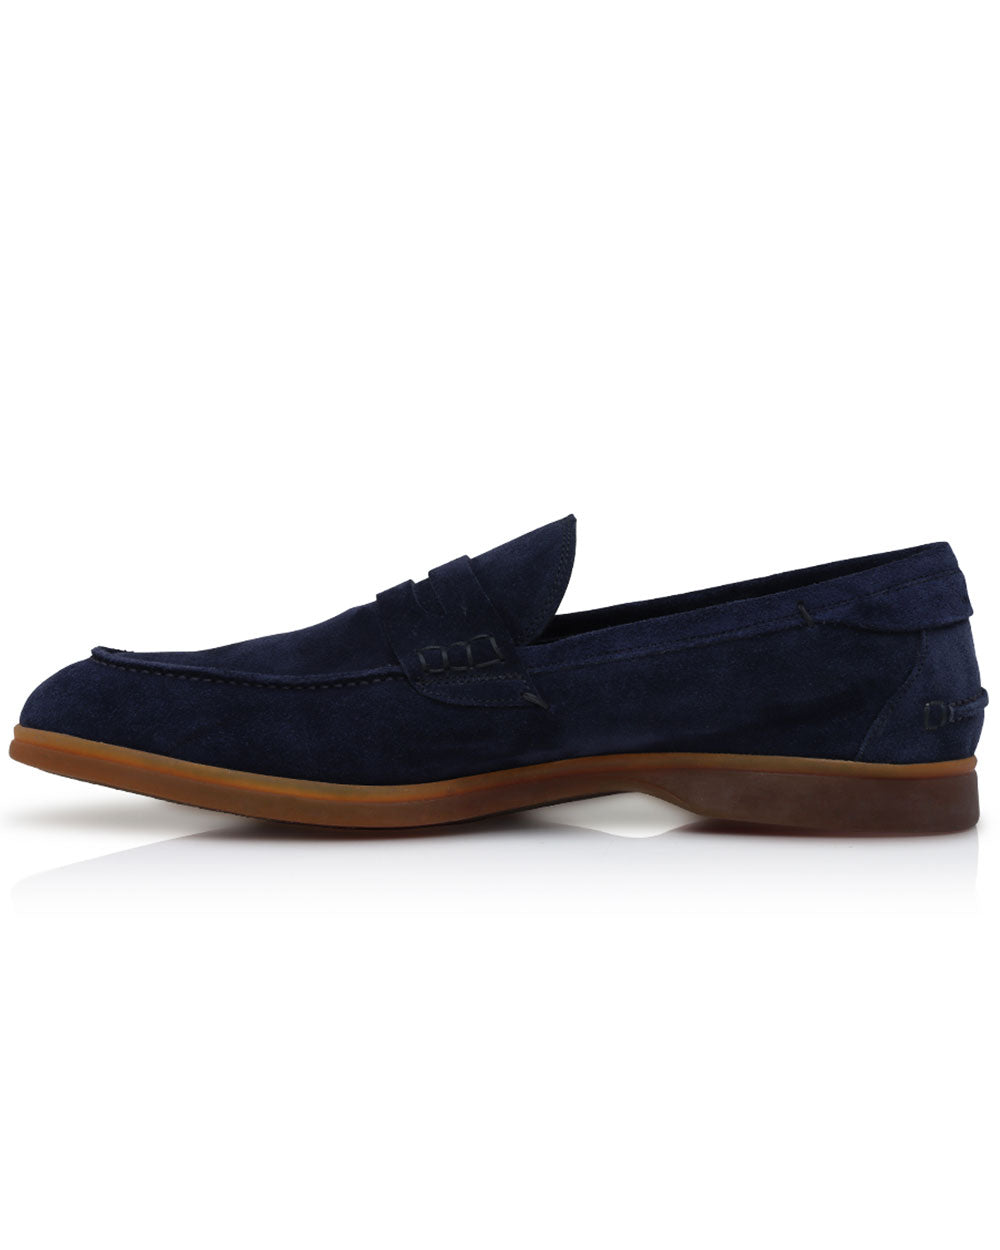 Suede Penny Loafer in Navy